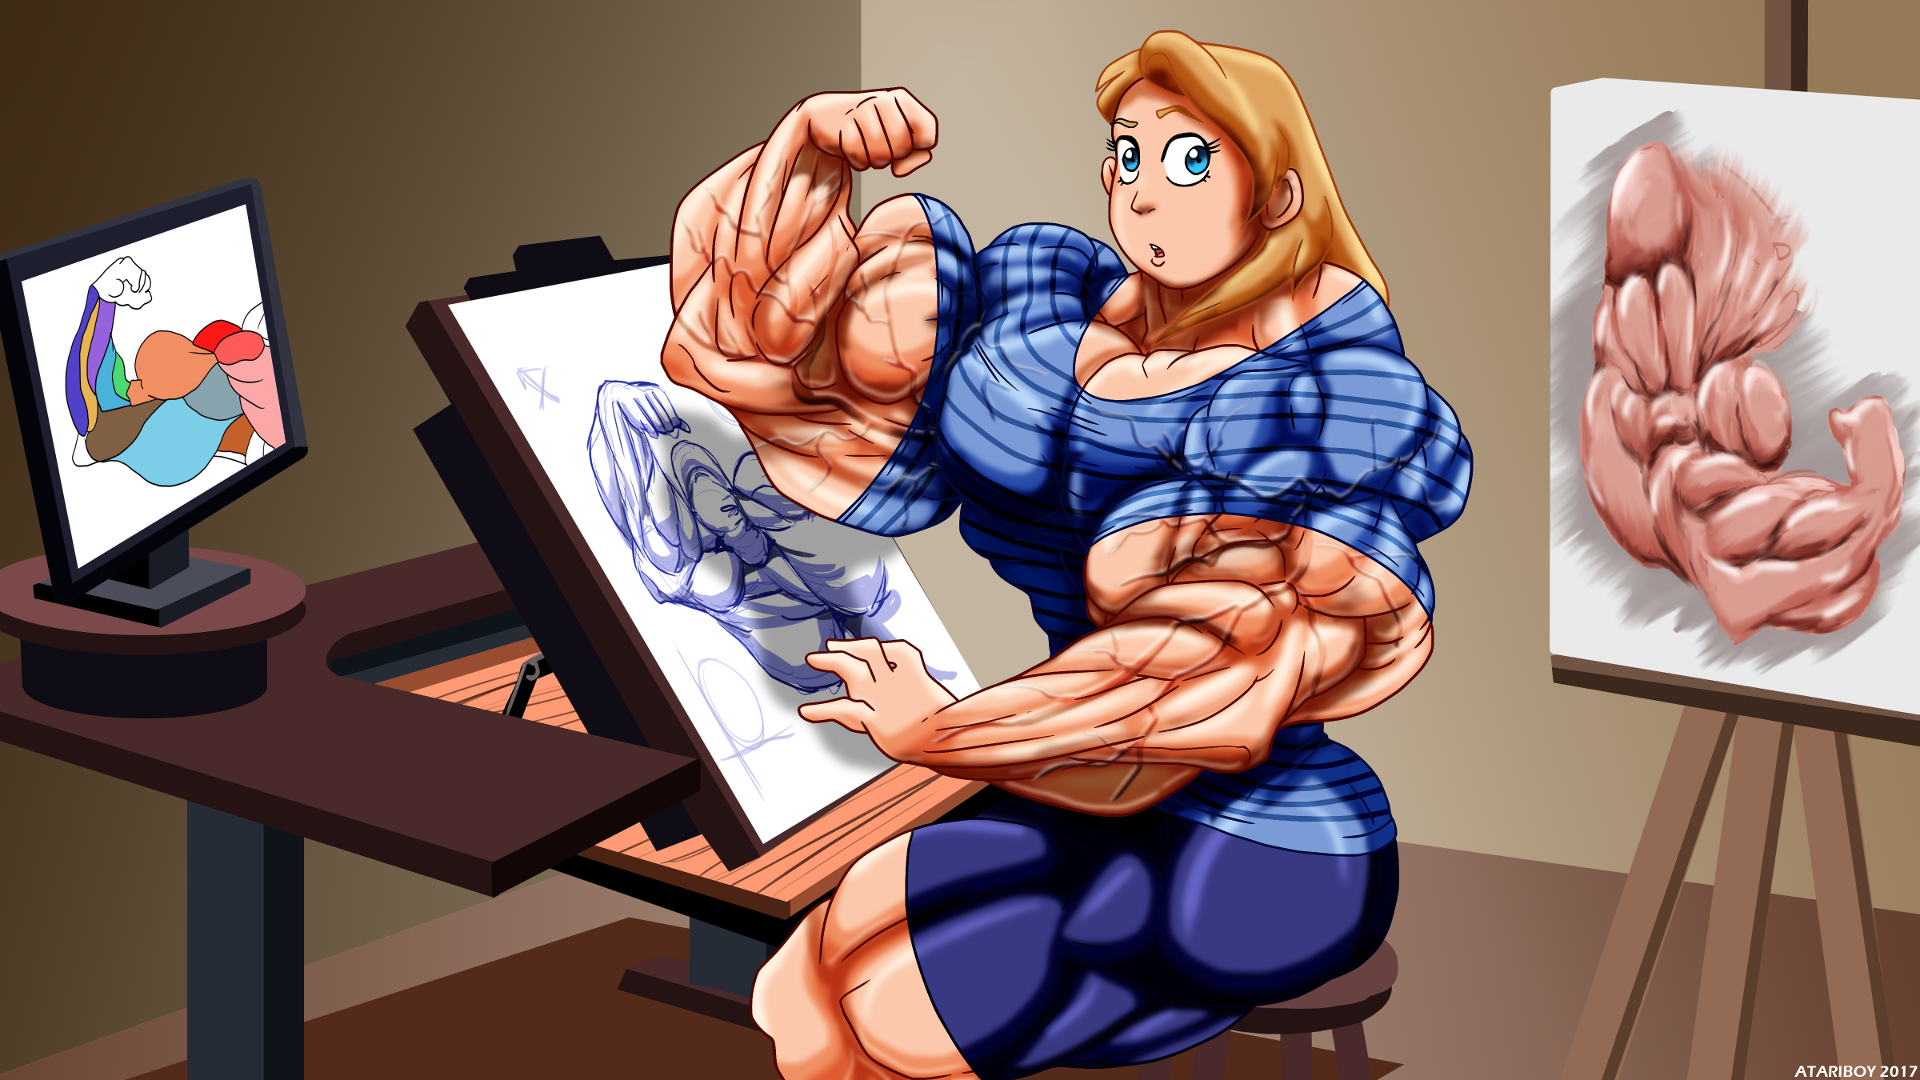 Female Muscle Growth Pov.